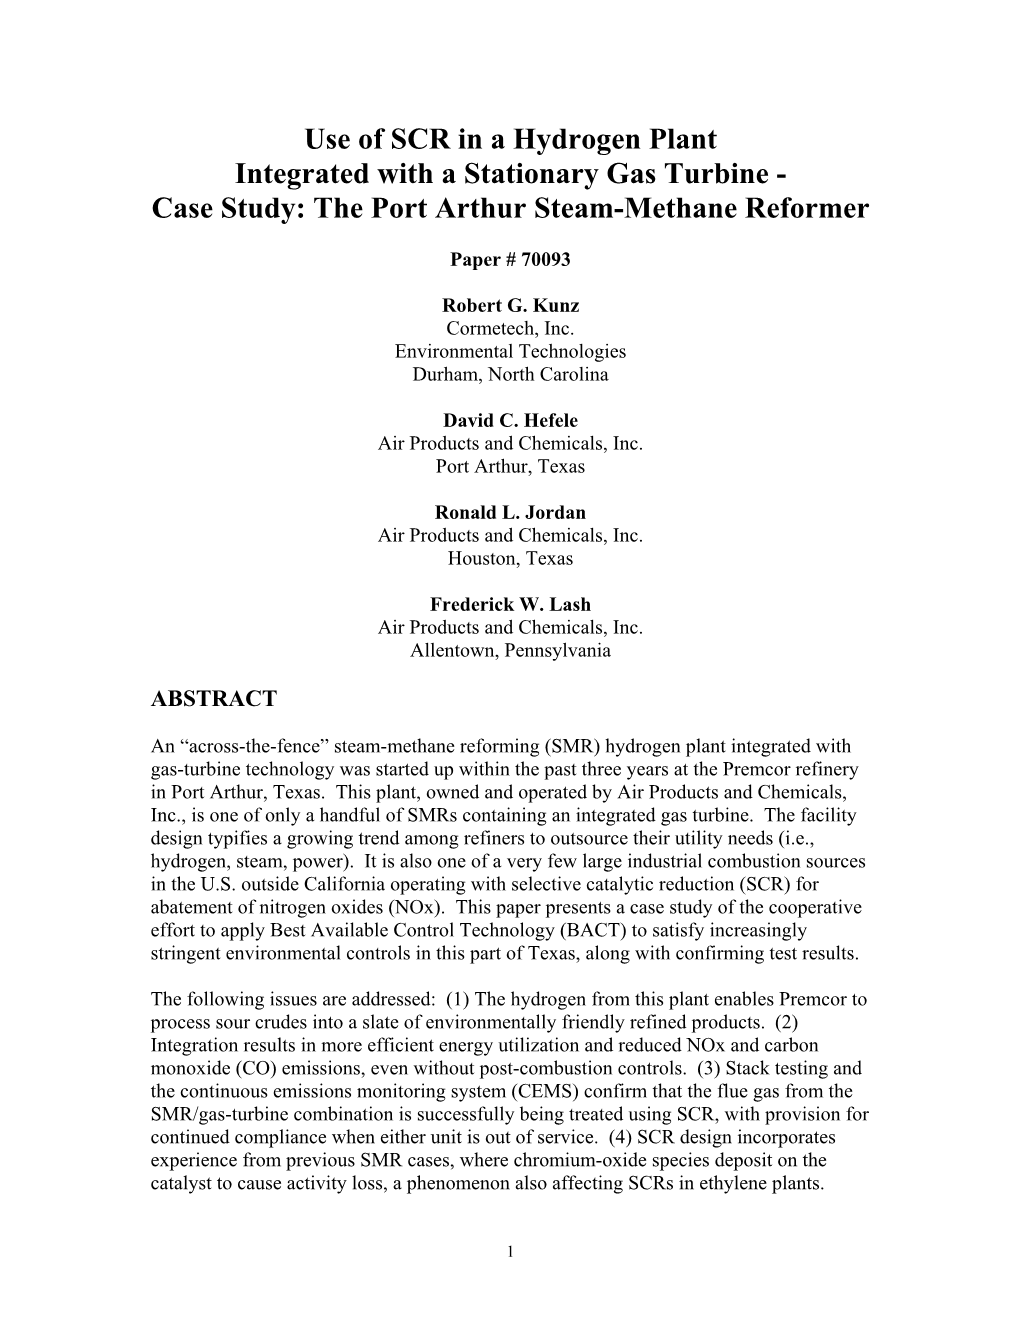 Use of SCR in a Hydrogen Plant Integrated with a Stationary Gas Turbine - Case Study: the Port Arthur Steam-Methane Reformer